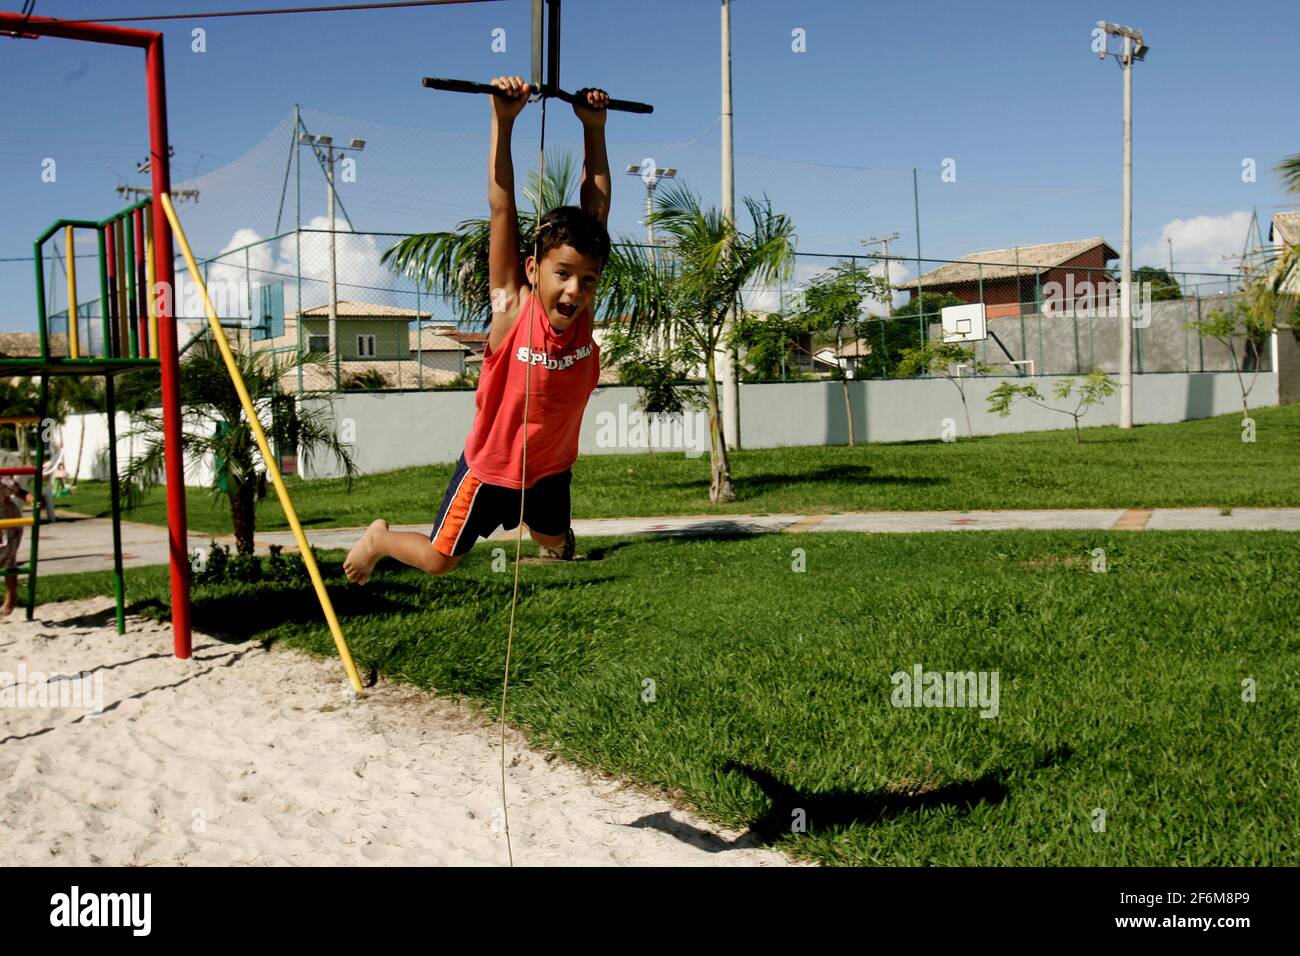 salvador, bahia / brazil - june 27, 2009: child is seen playing on zip lines in a condominium boat in the city of Salvador. Stock Photo